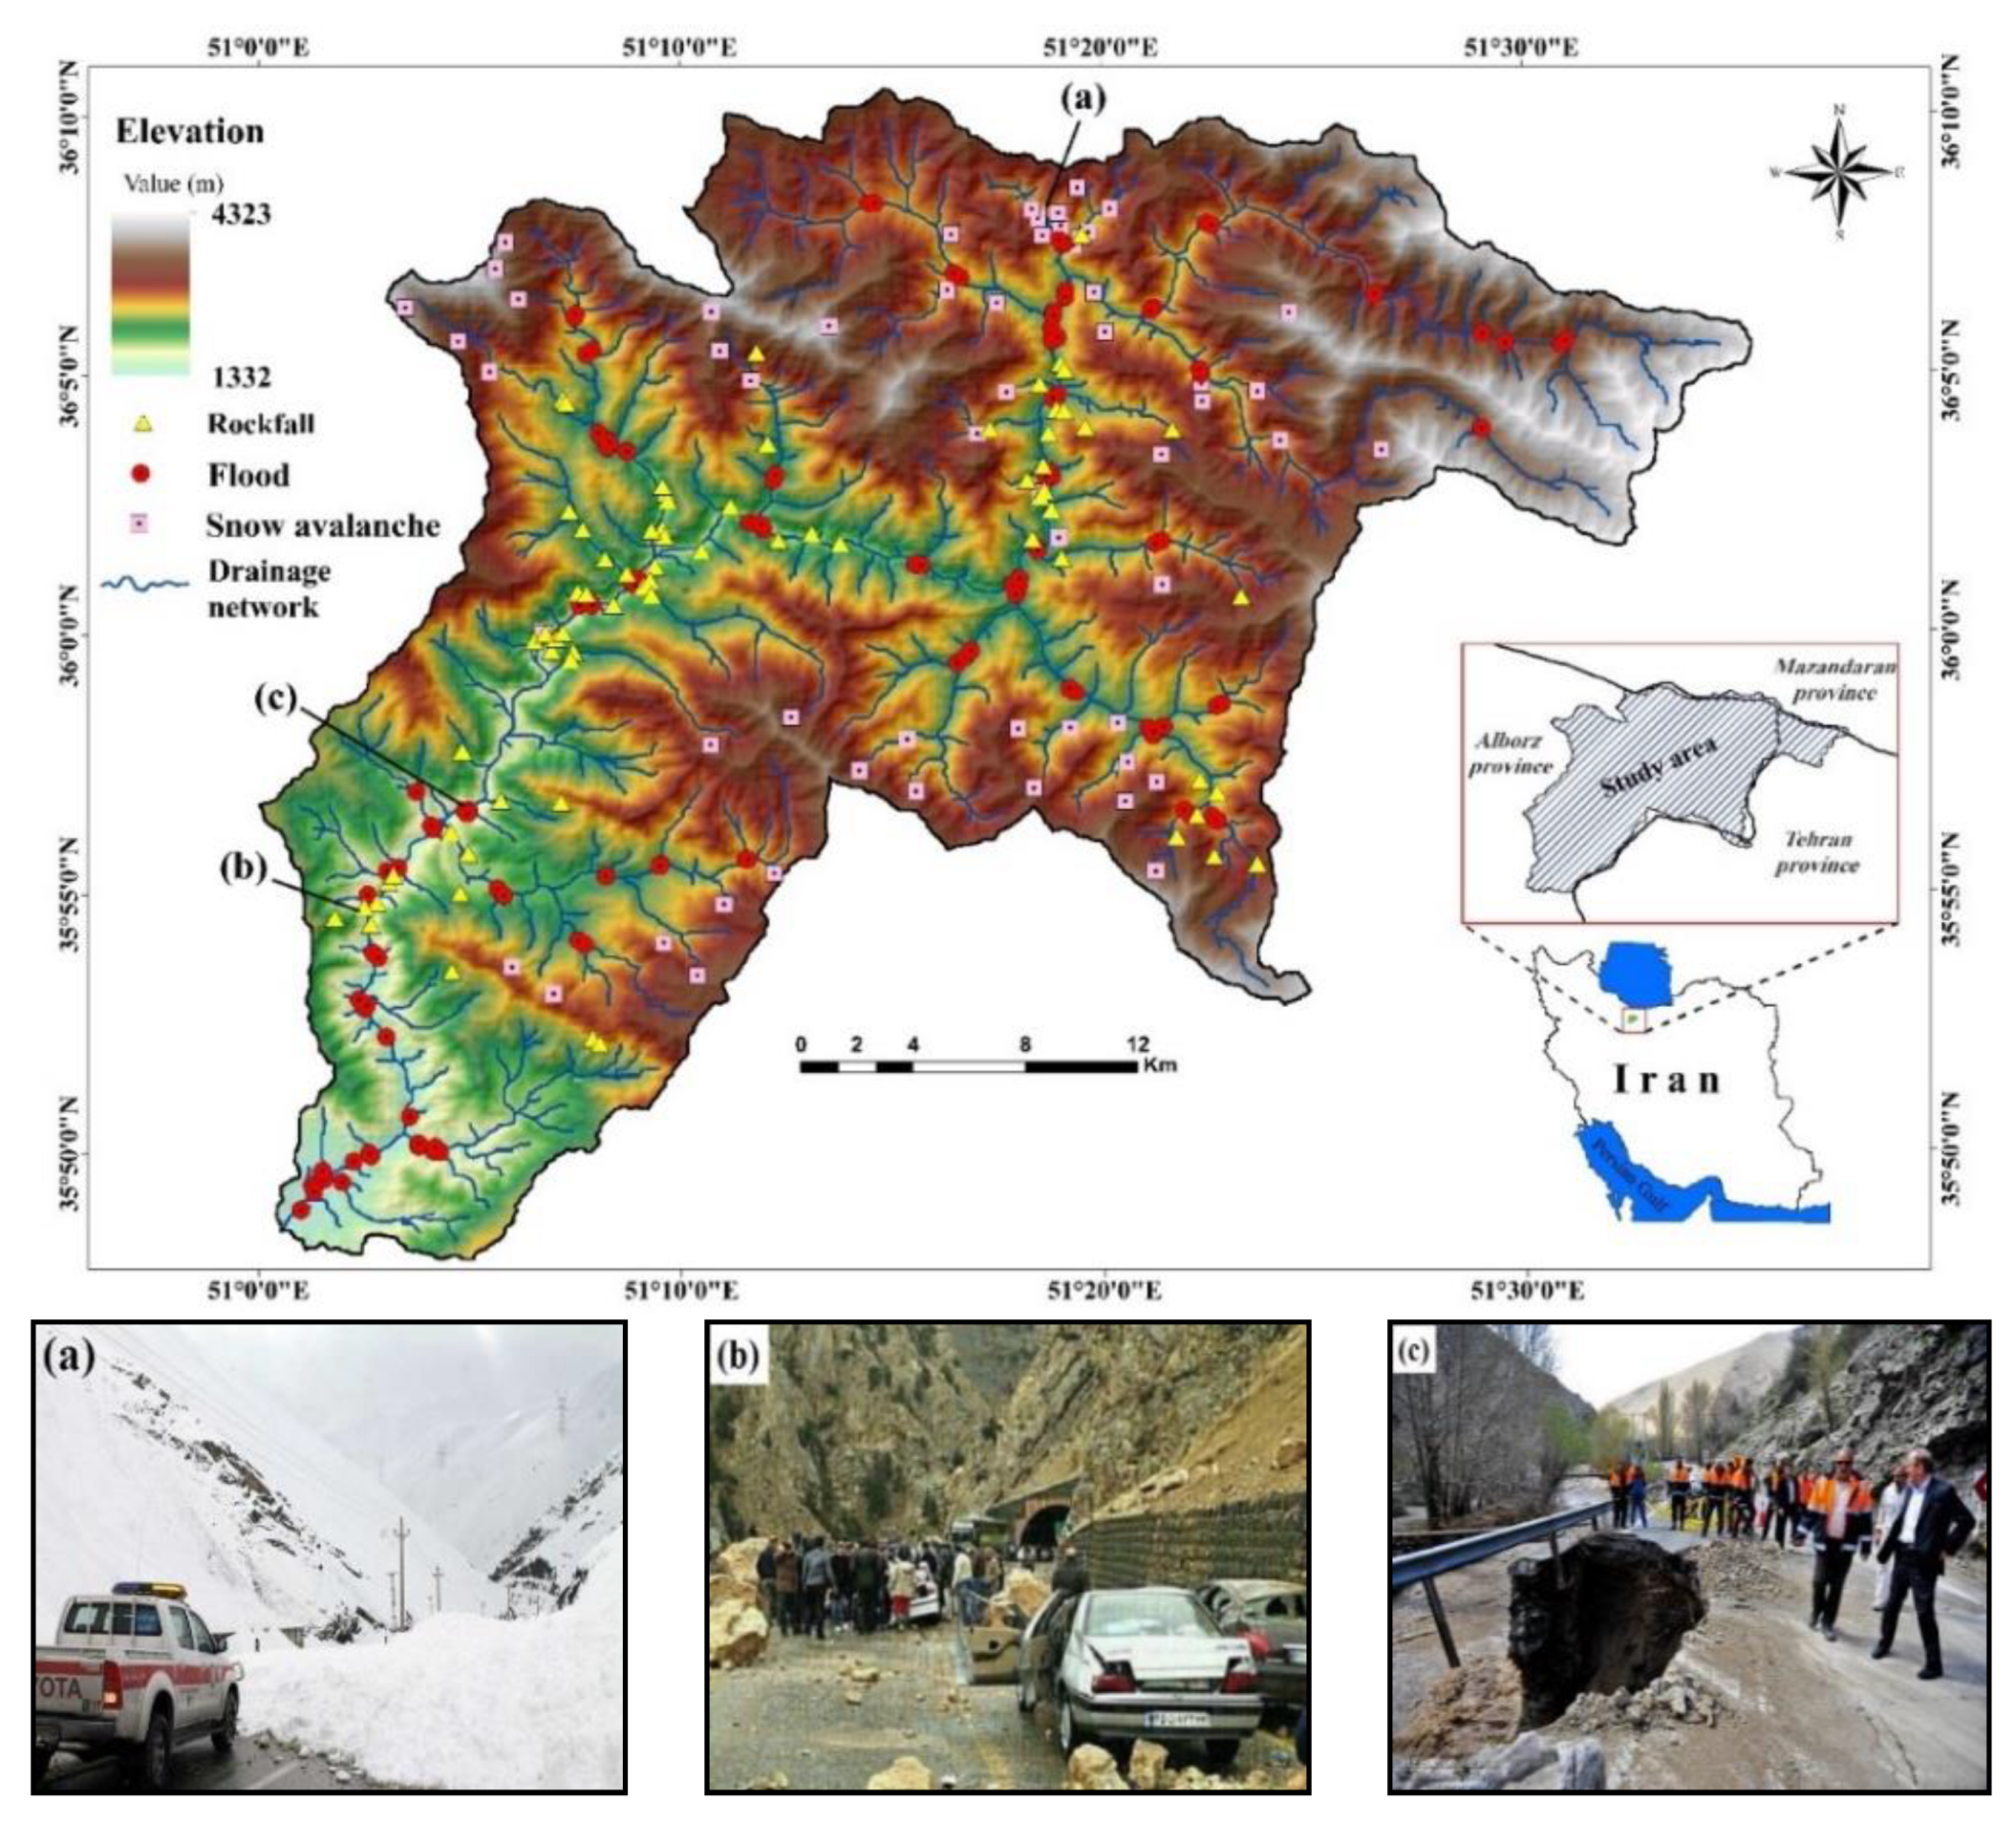 Remote Sensing | Free Full-Text | Multi-Hazard Exposure Mapping Using  Machine Learning Techniques: A Case Study from Iran | HTML